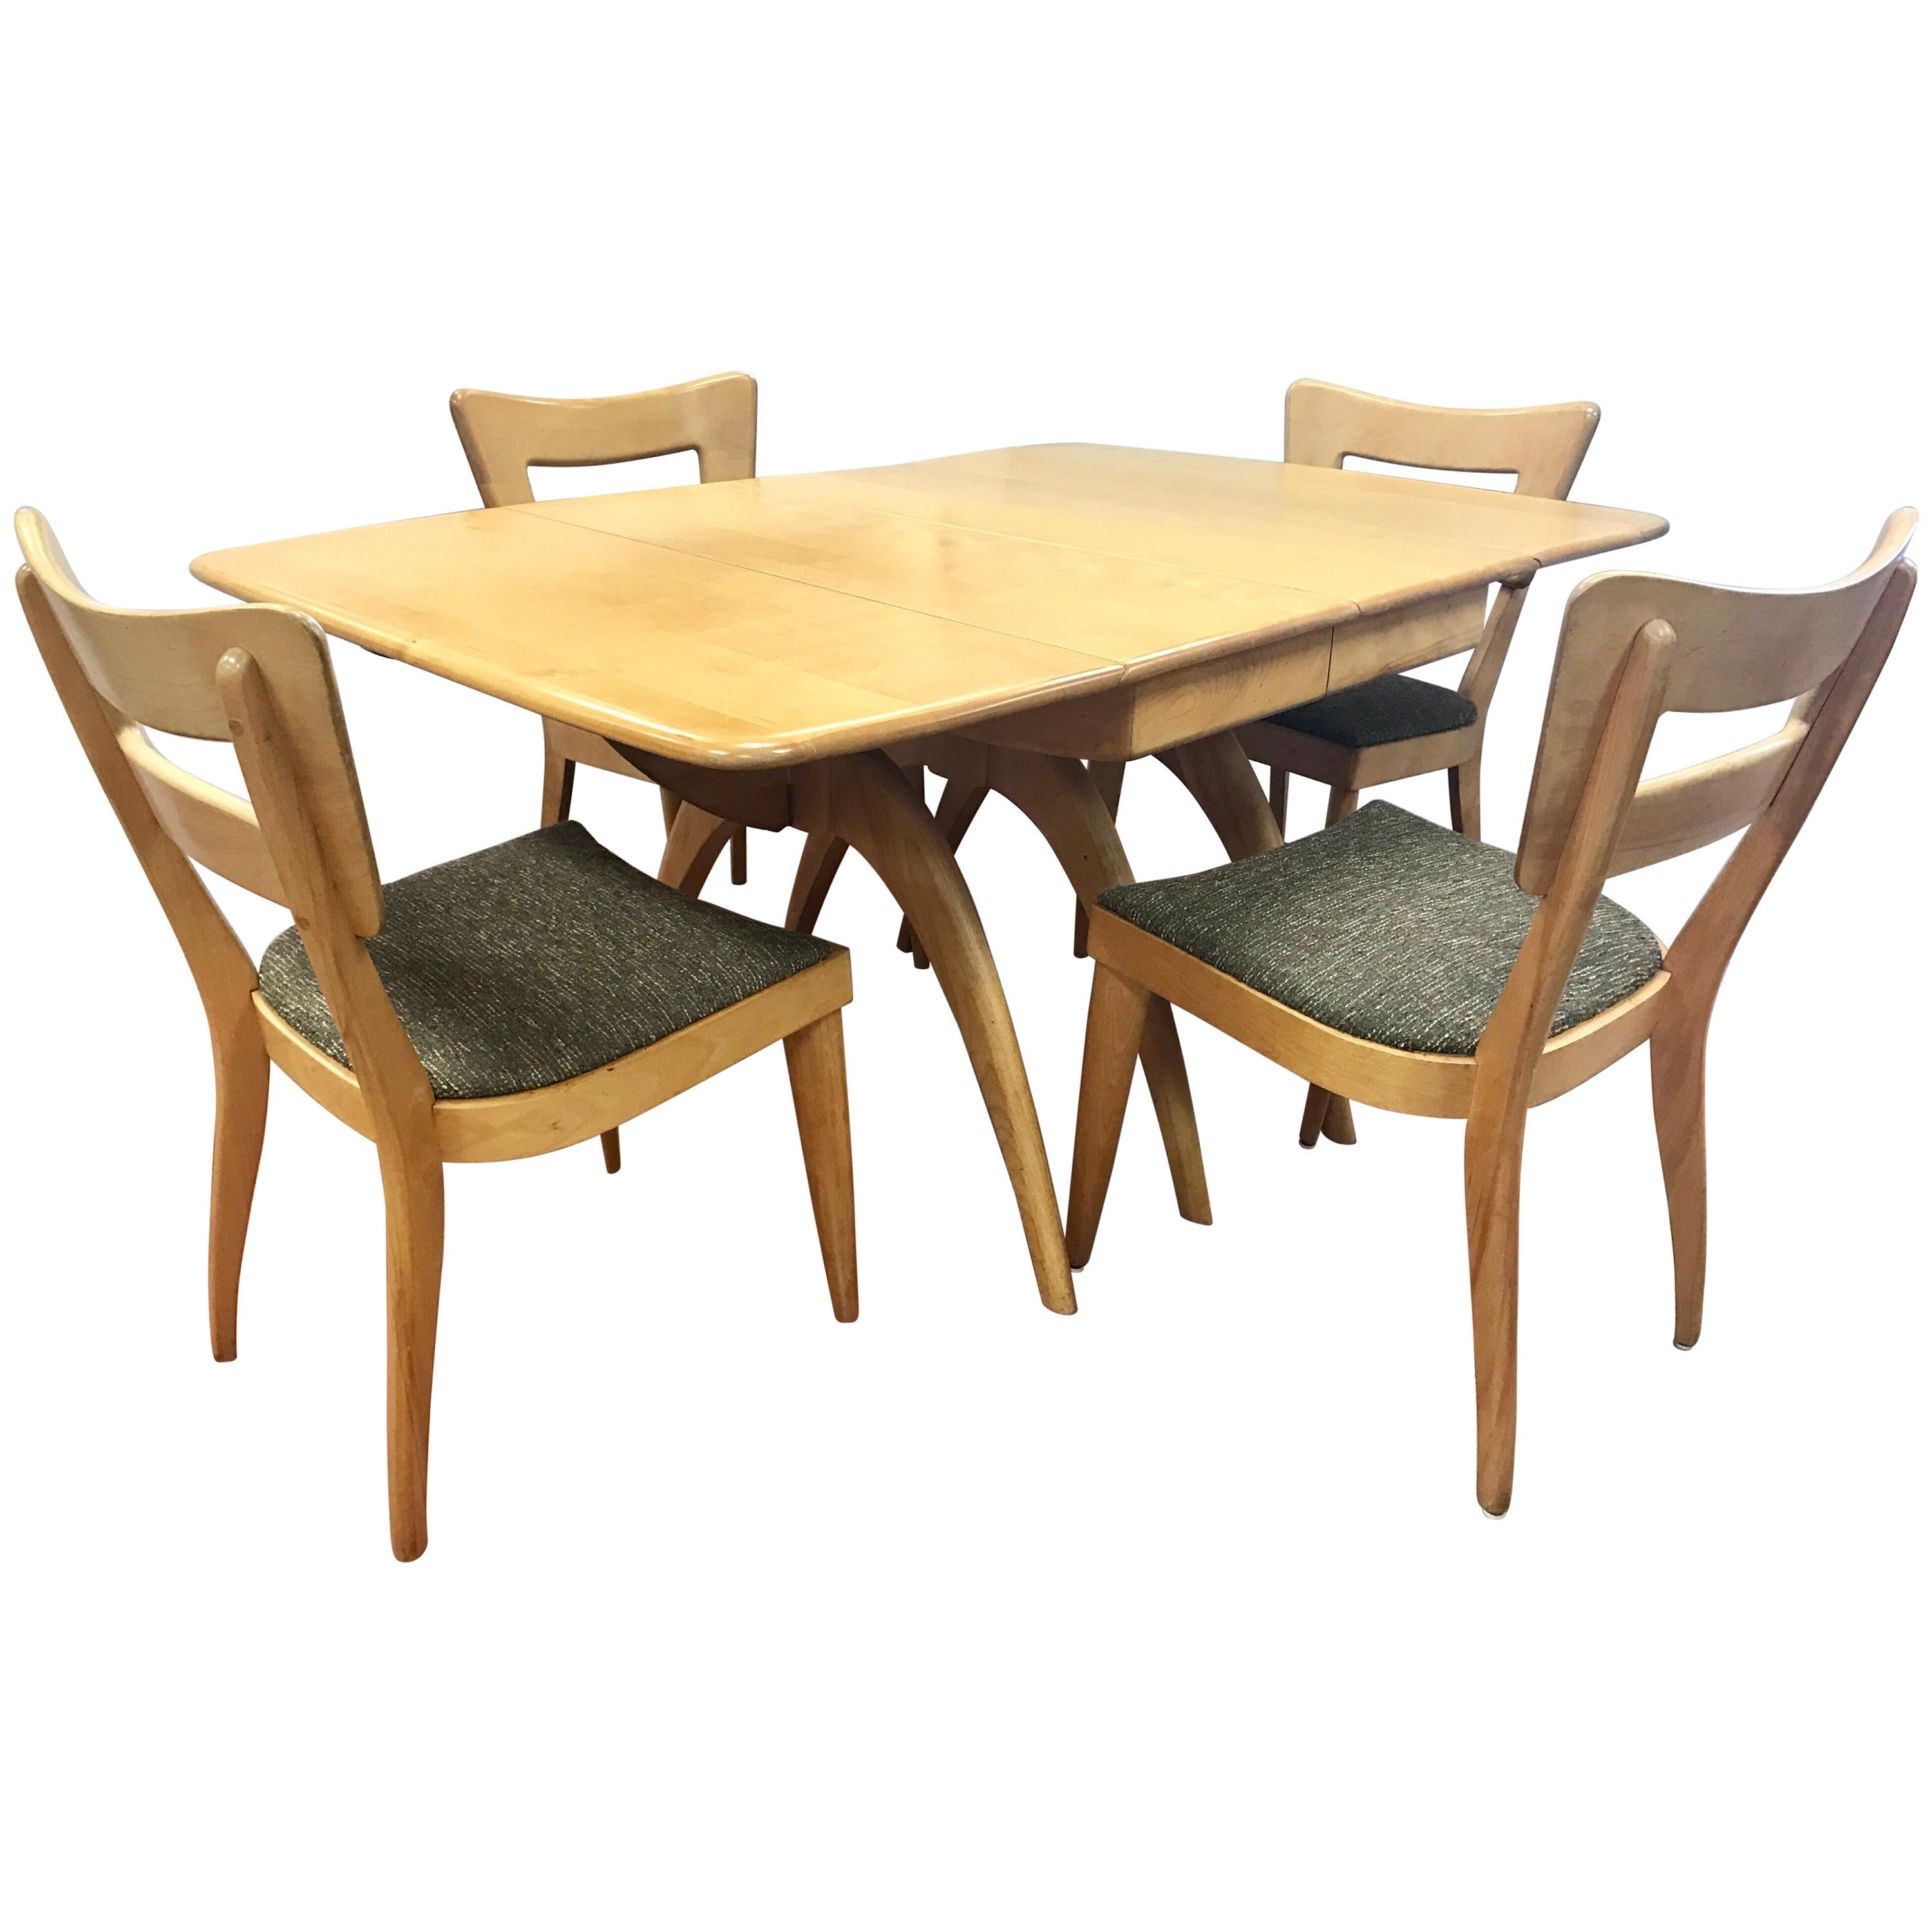 Heywood Wakefield Dining Set Champagne Boomerang Dining Table Dog Bone Chairs